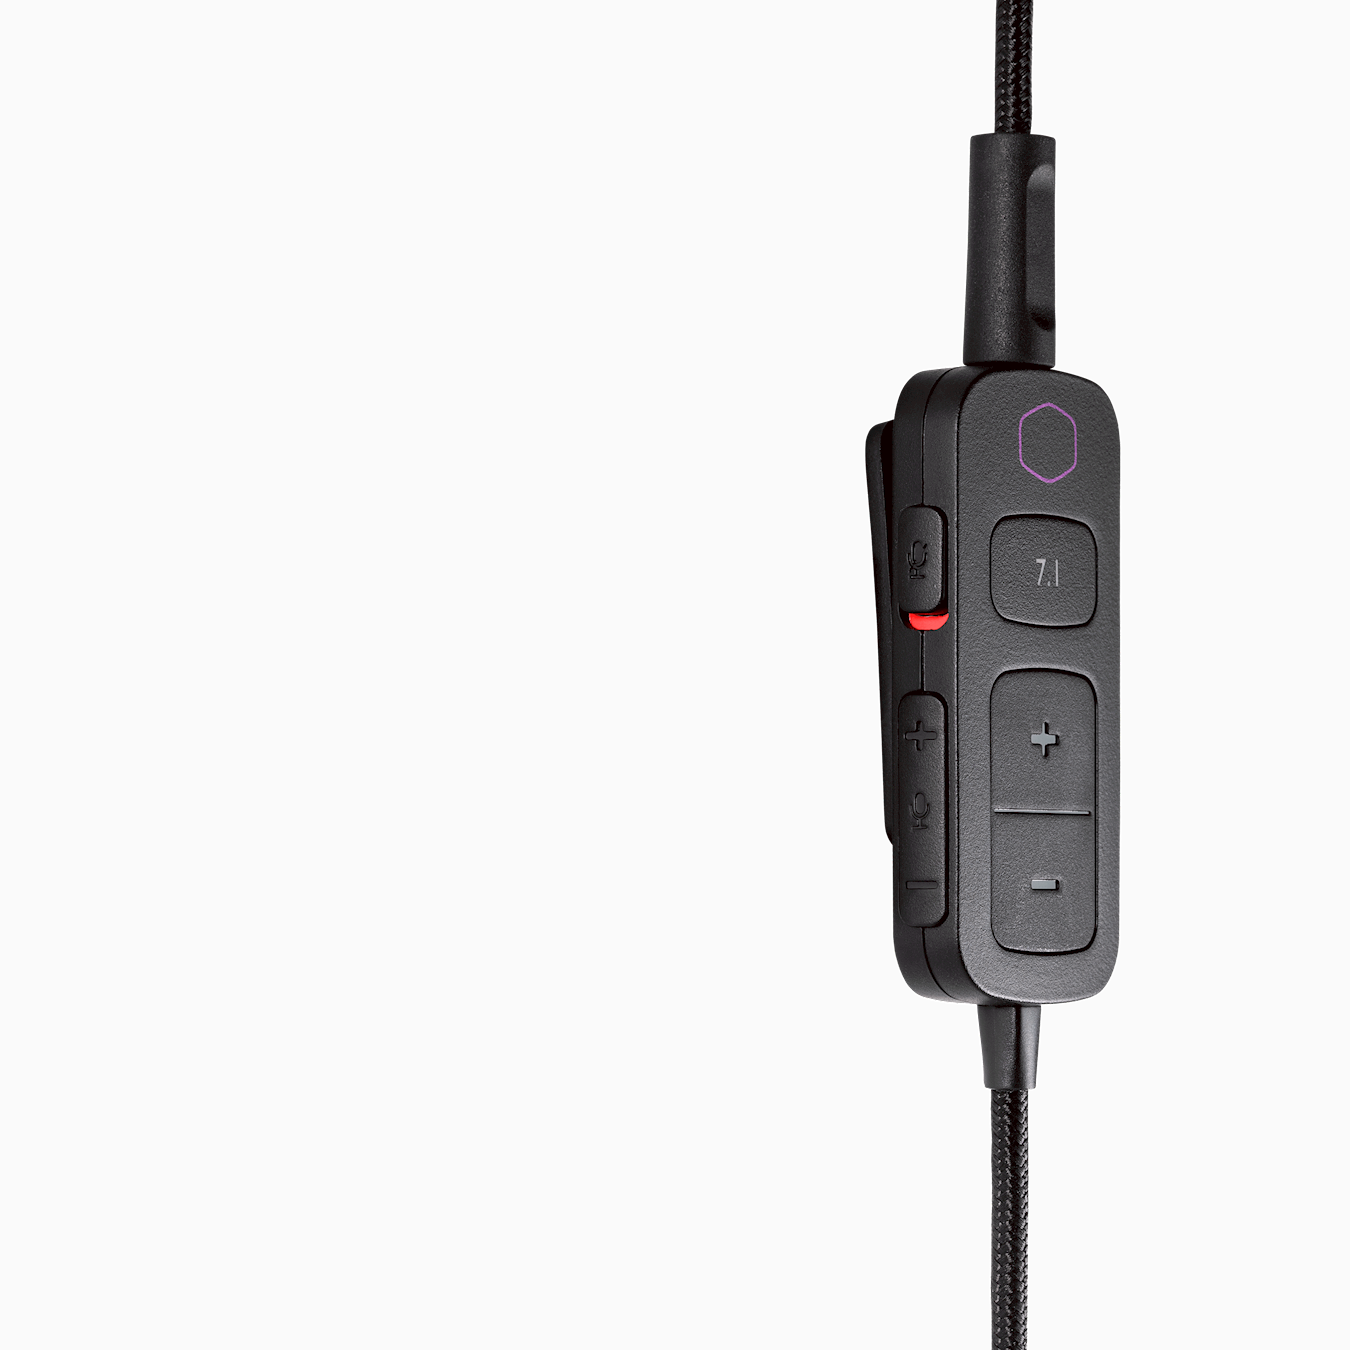 MH752 - the USB sound card controls the headset and provides virtual 7.1 surround sound to expand the soundstage